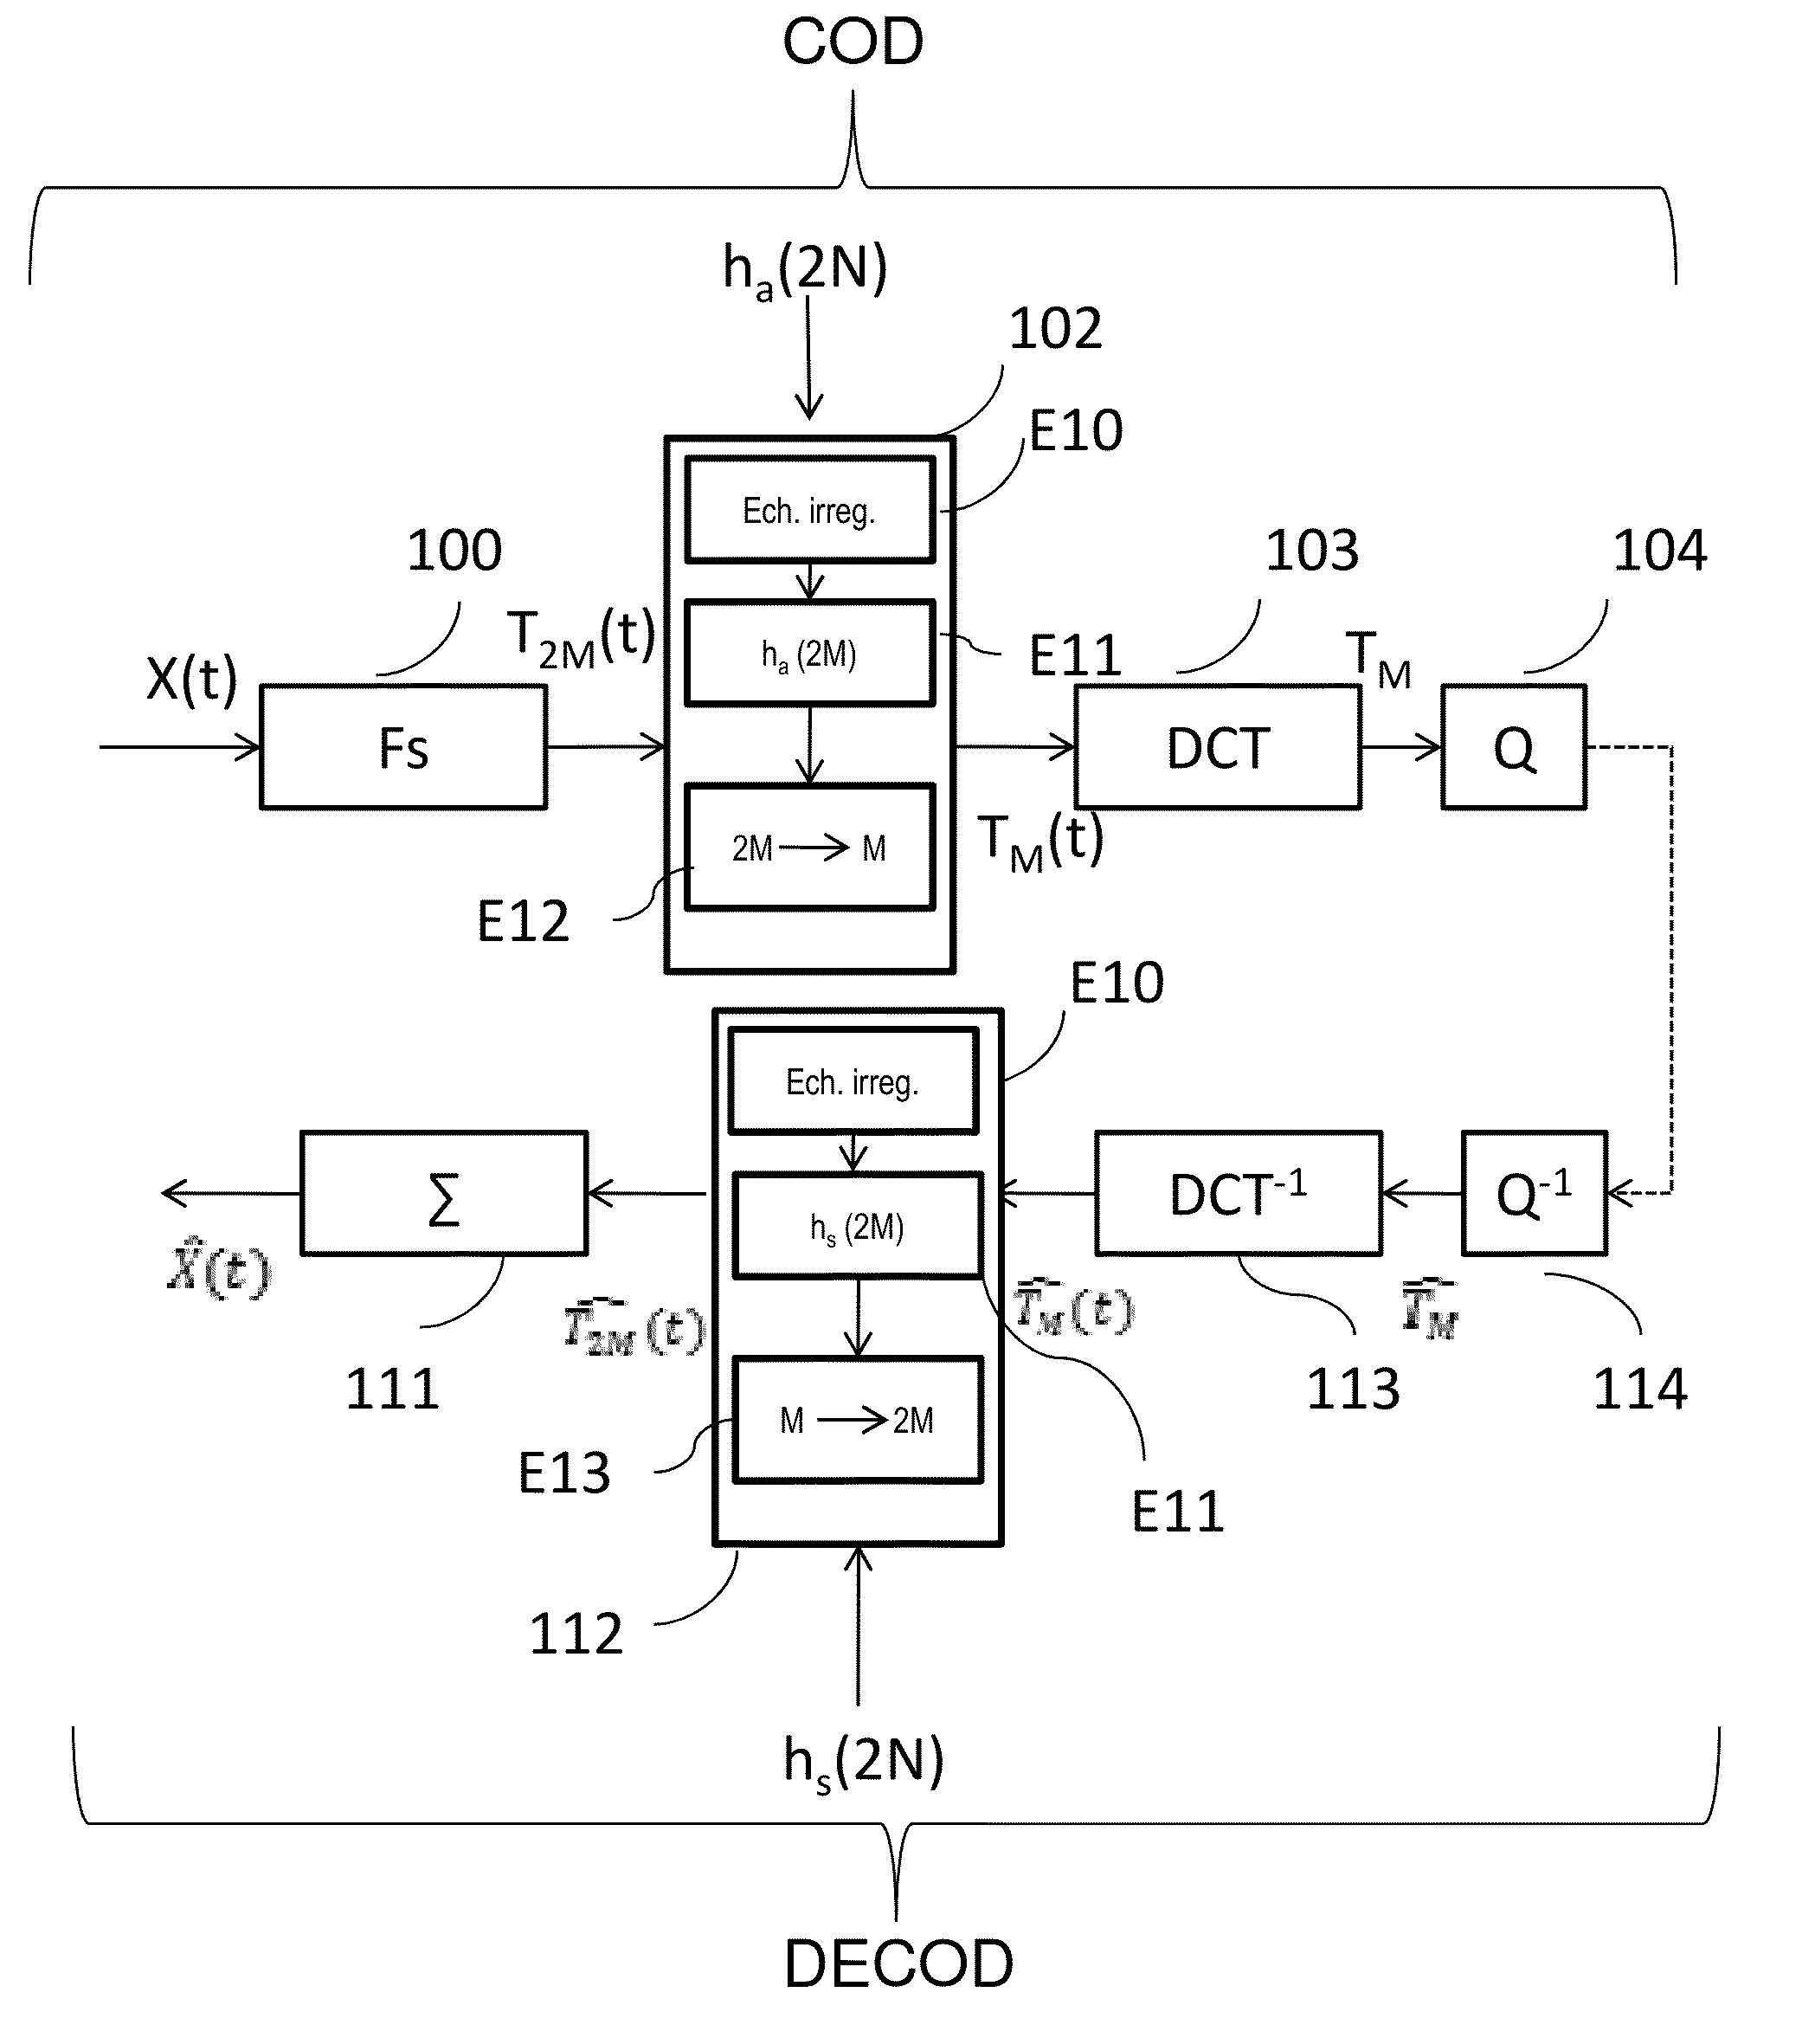 Adaptations of analysis or synthesis weighting windows for transform coding or decoding